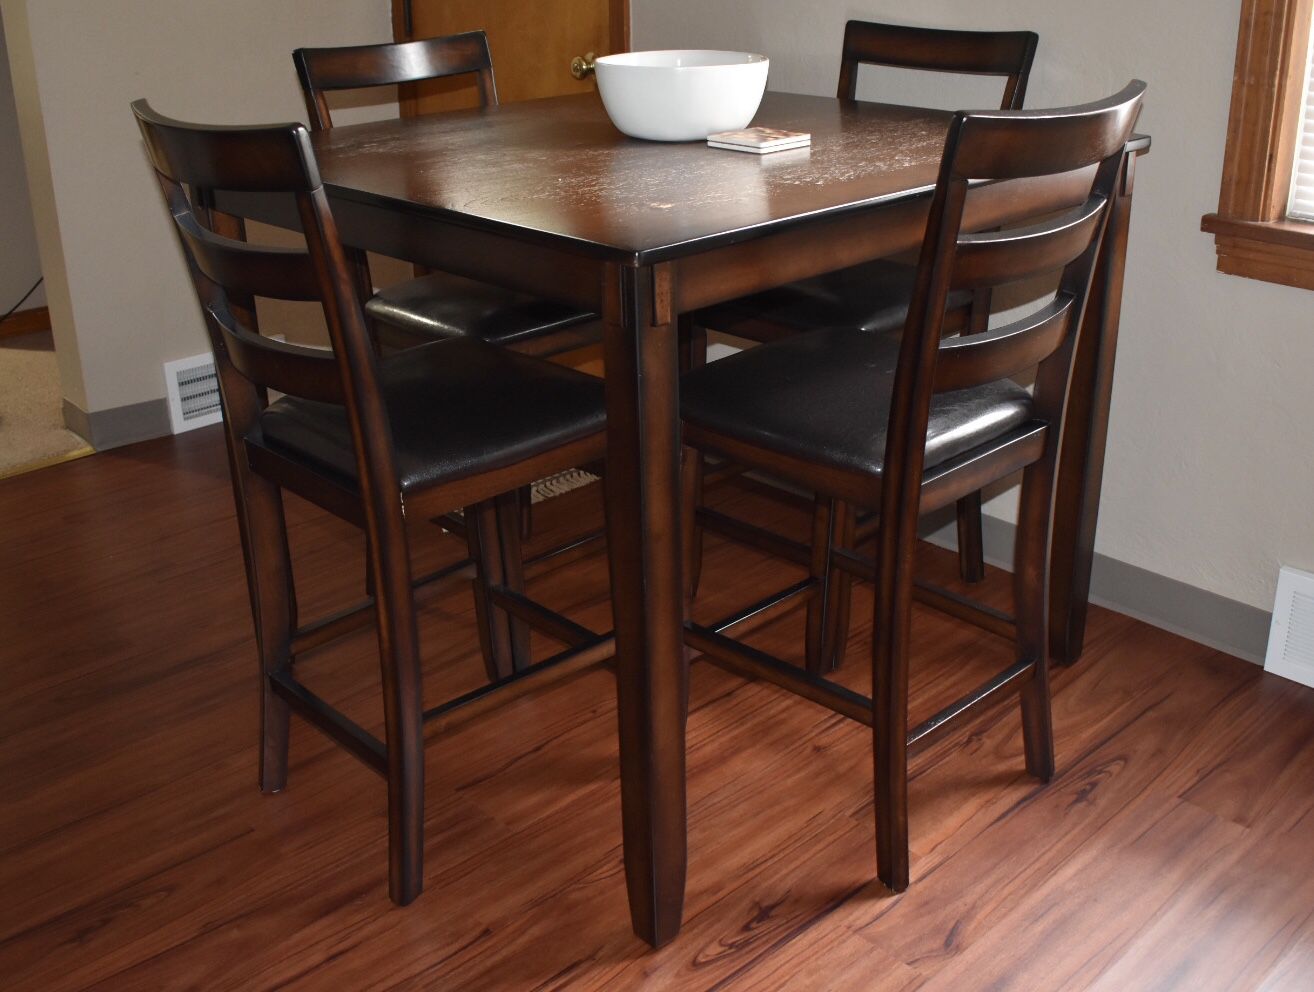 42" Counter Height Dining Table